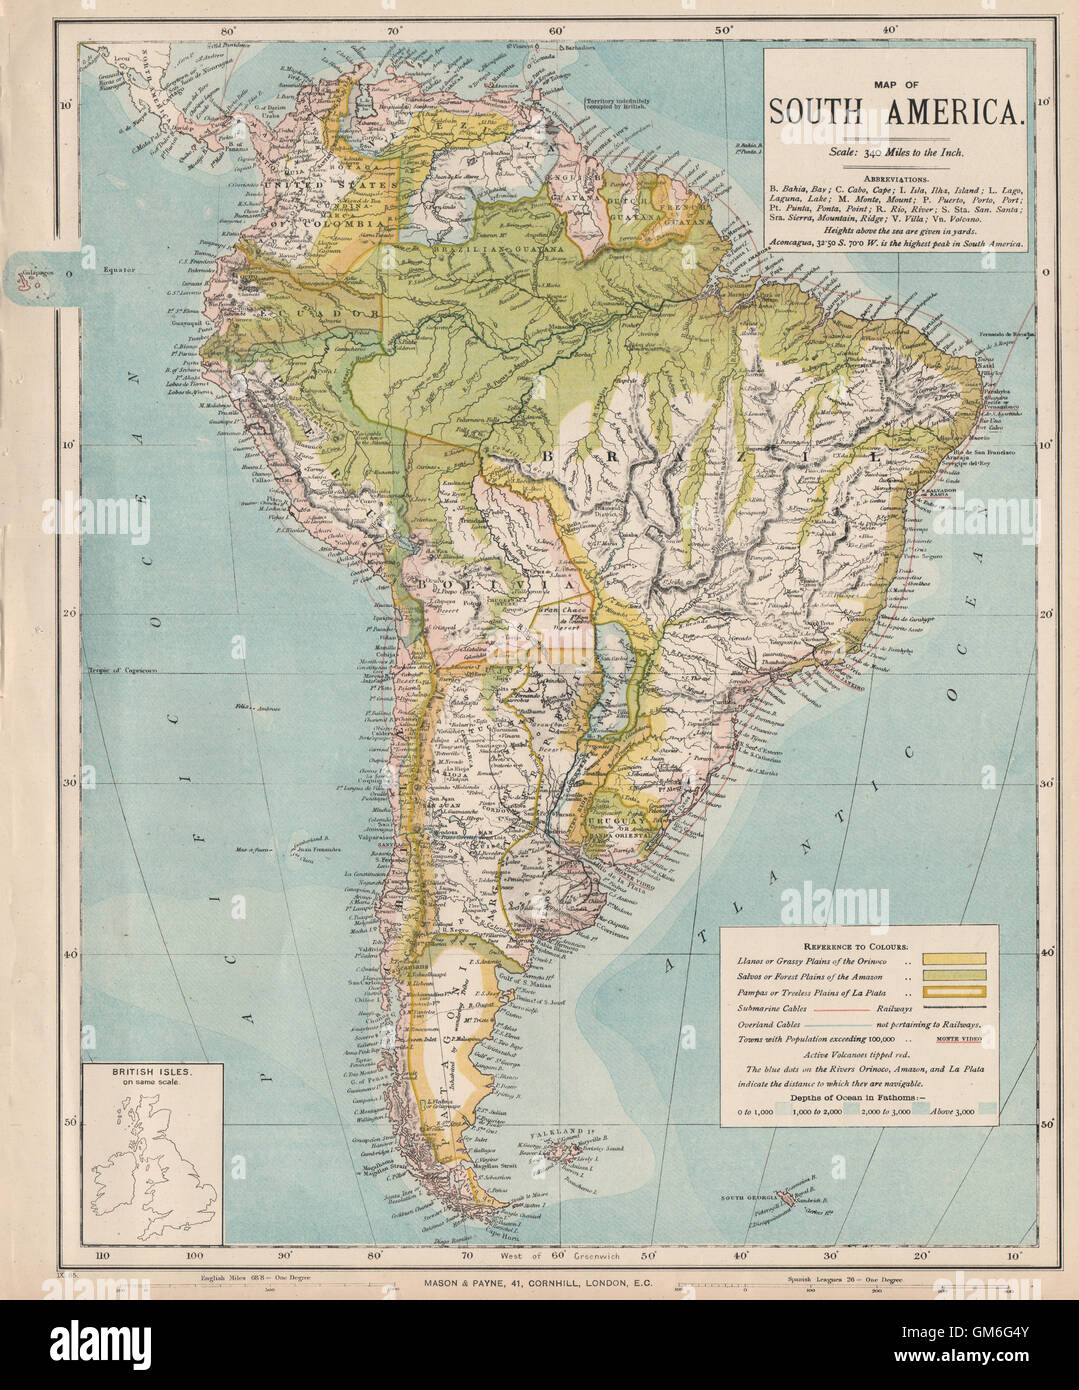 SOUTH AMERICA. Amazon rainforest. Pampas. Telegraph cables. LETTS, 1889 map  Stock Photo - Alamy